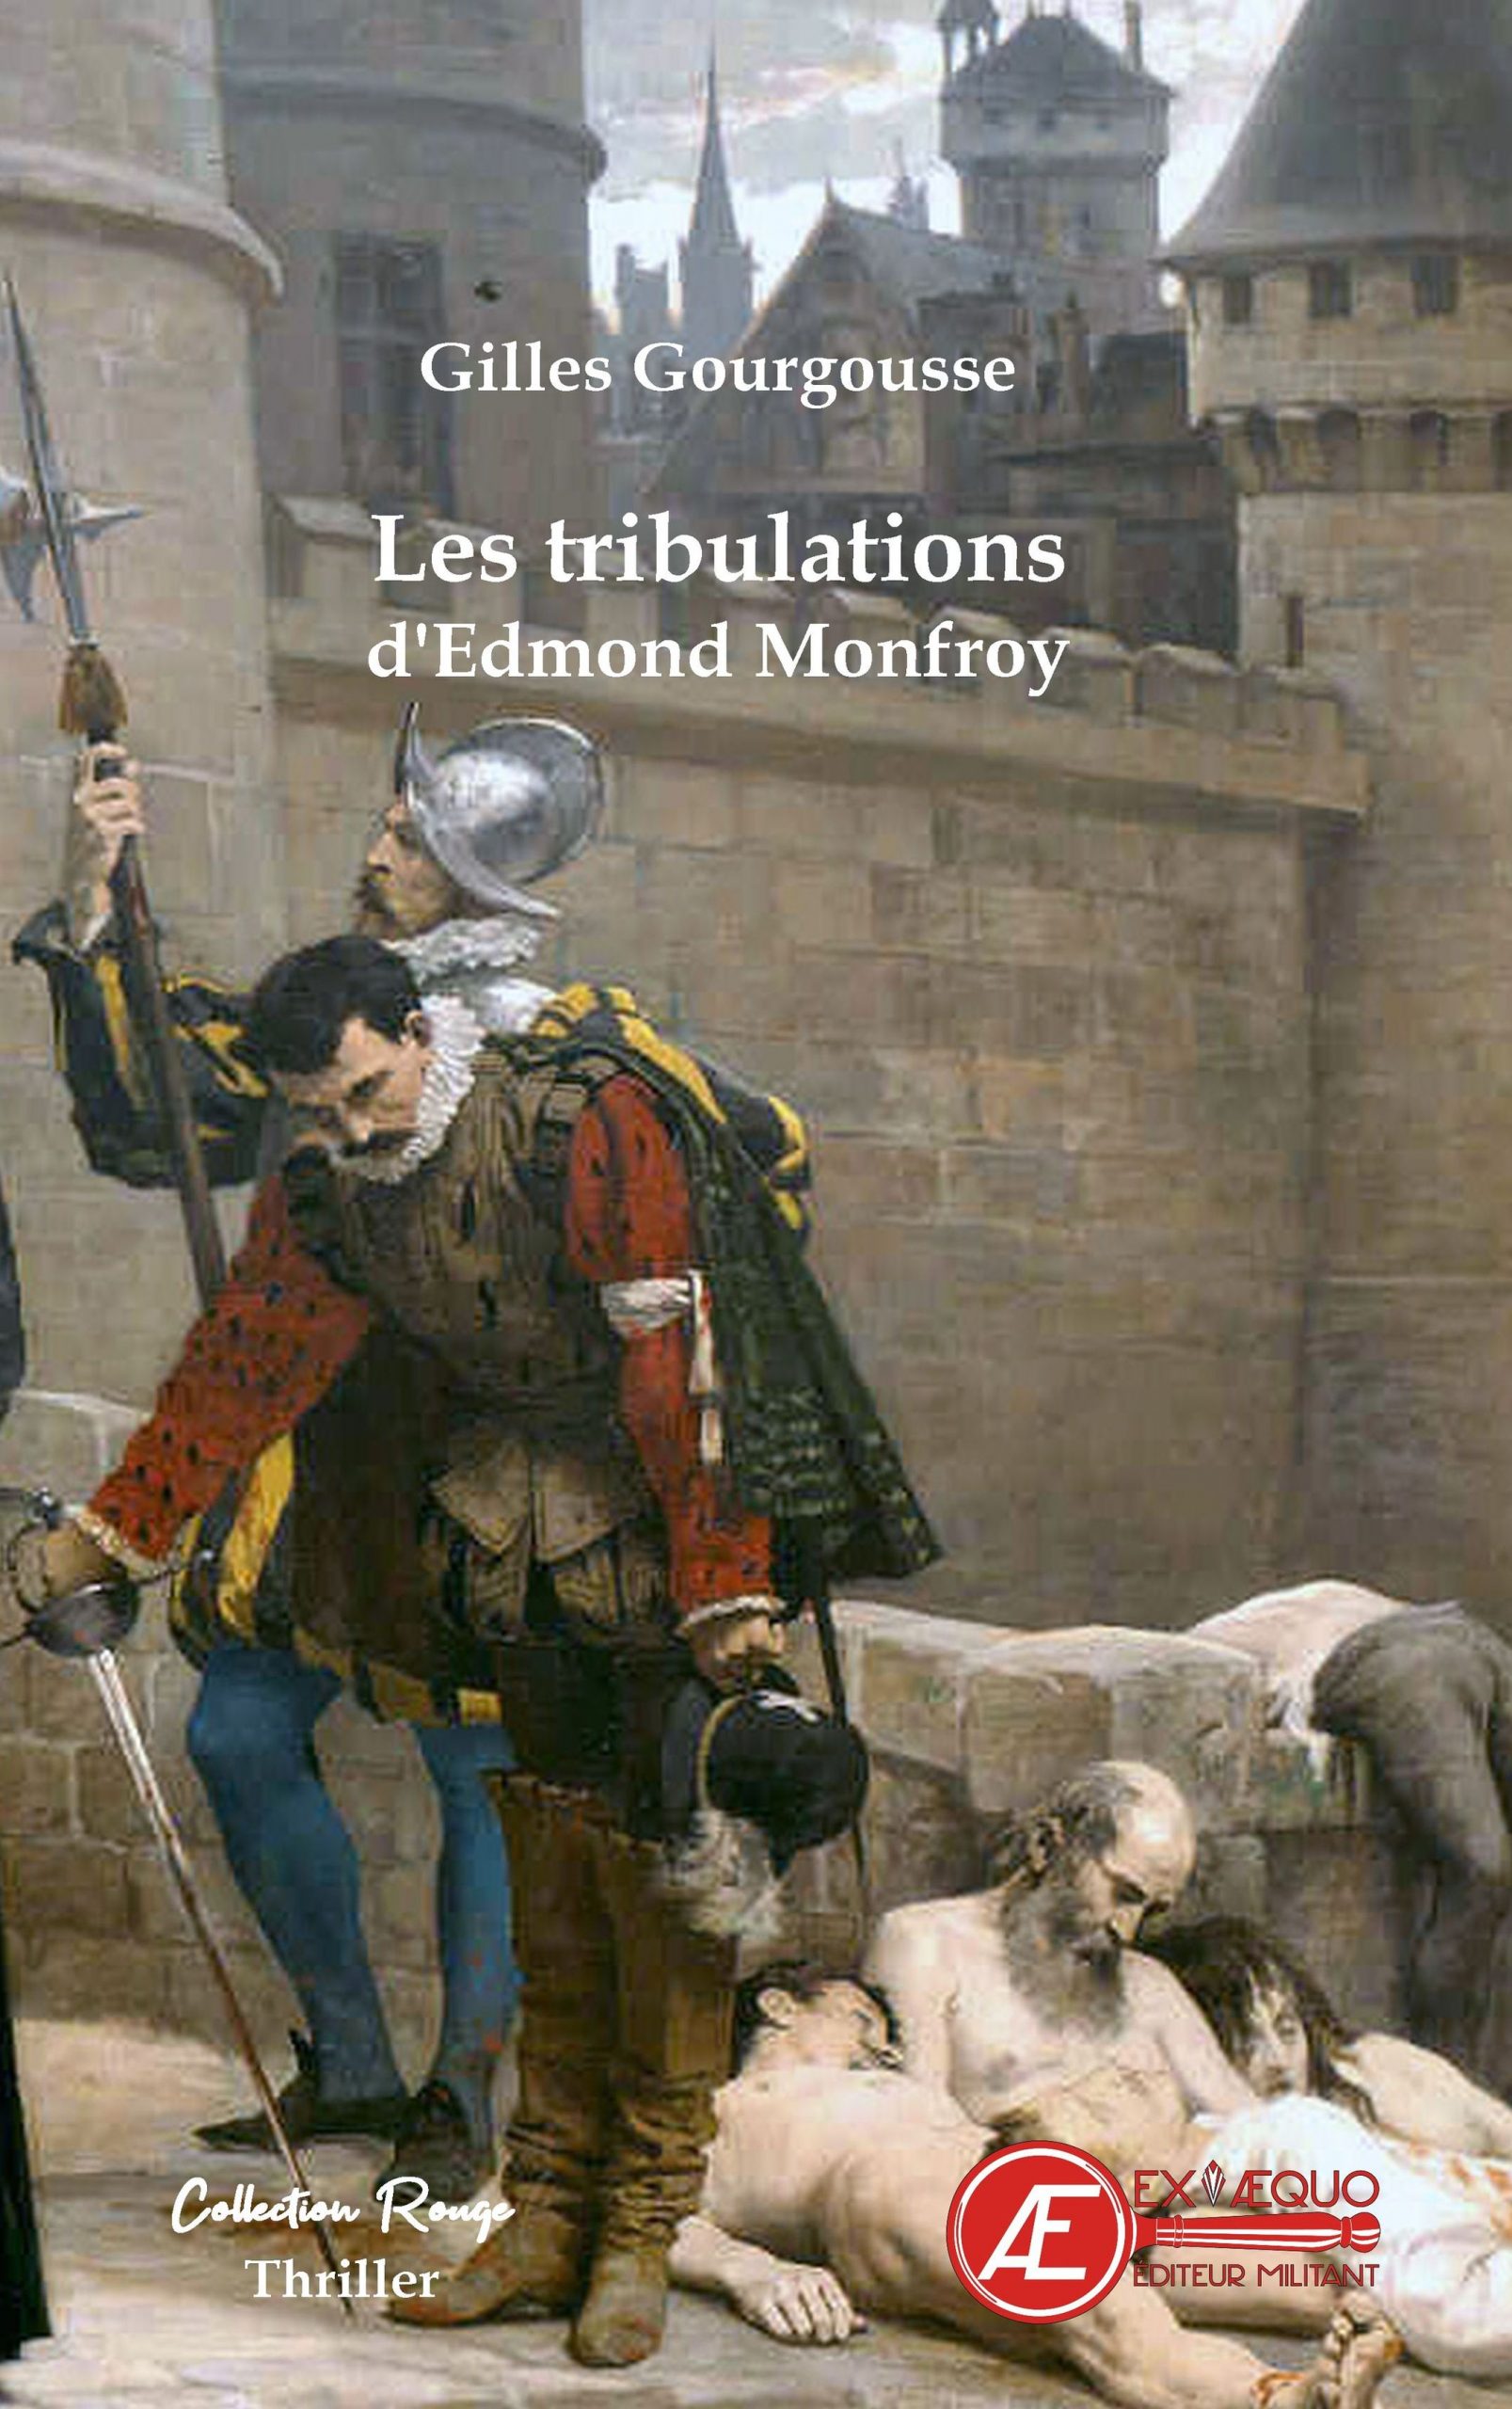 You are currently viewing Les tribulations d’Edmond Monfroy